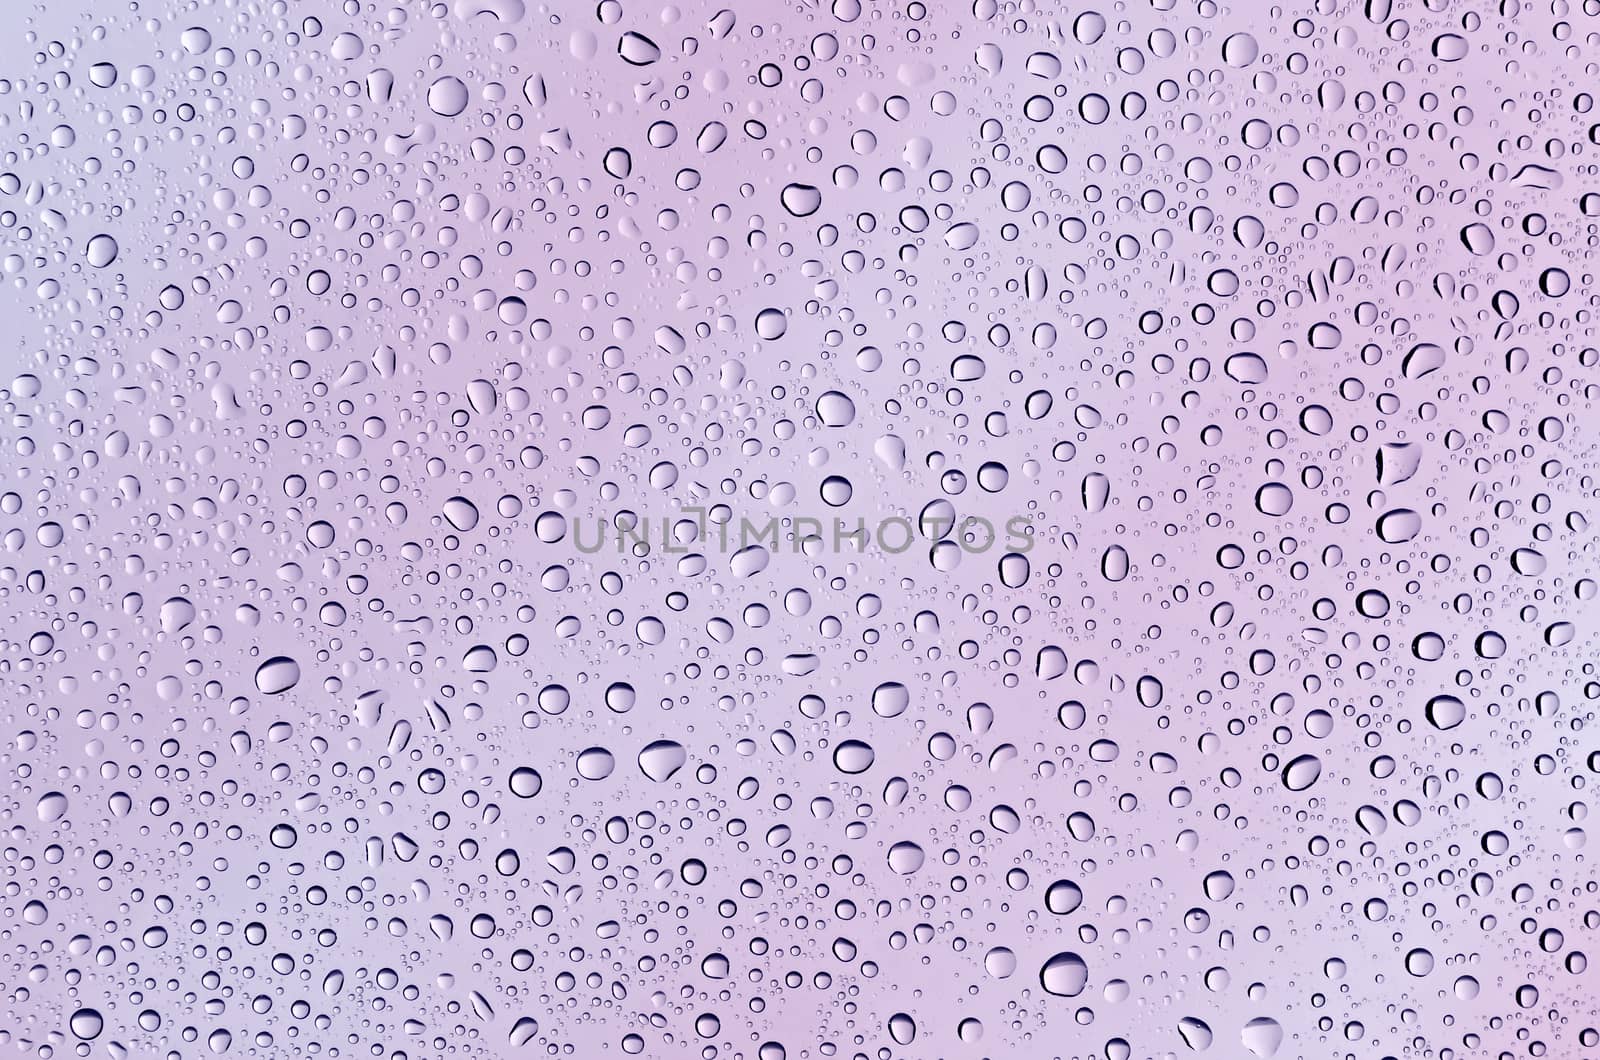 Drops on the glass, lilac-pink background by Gaina